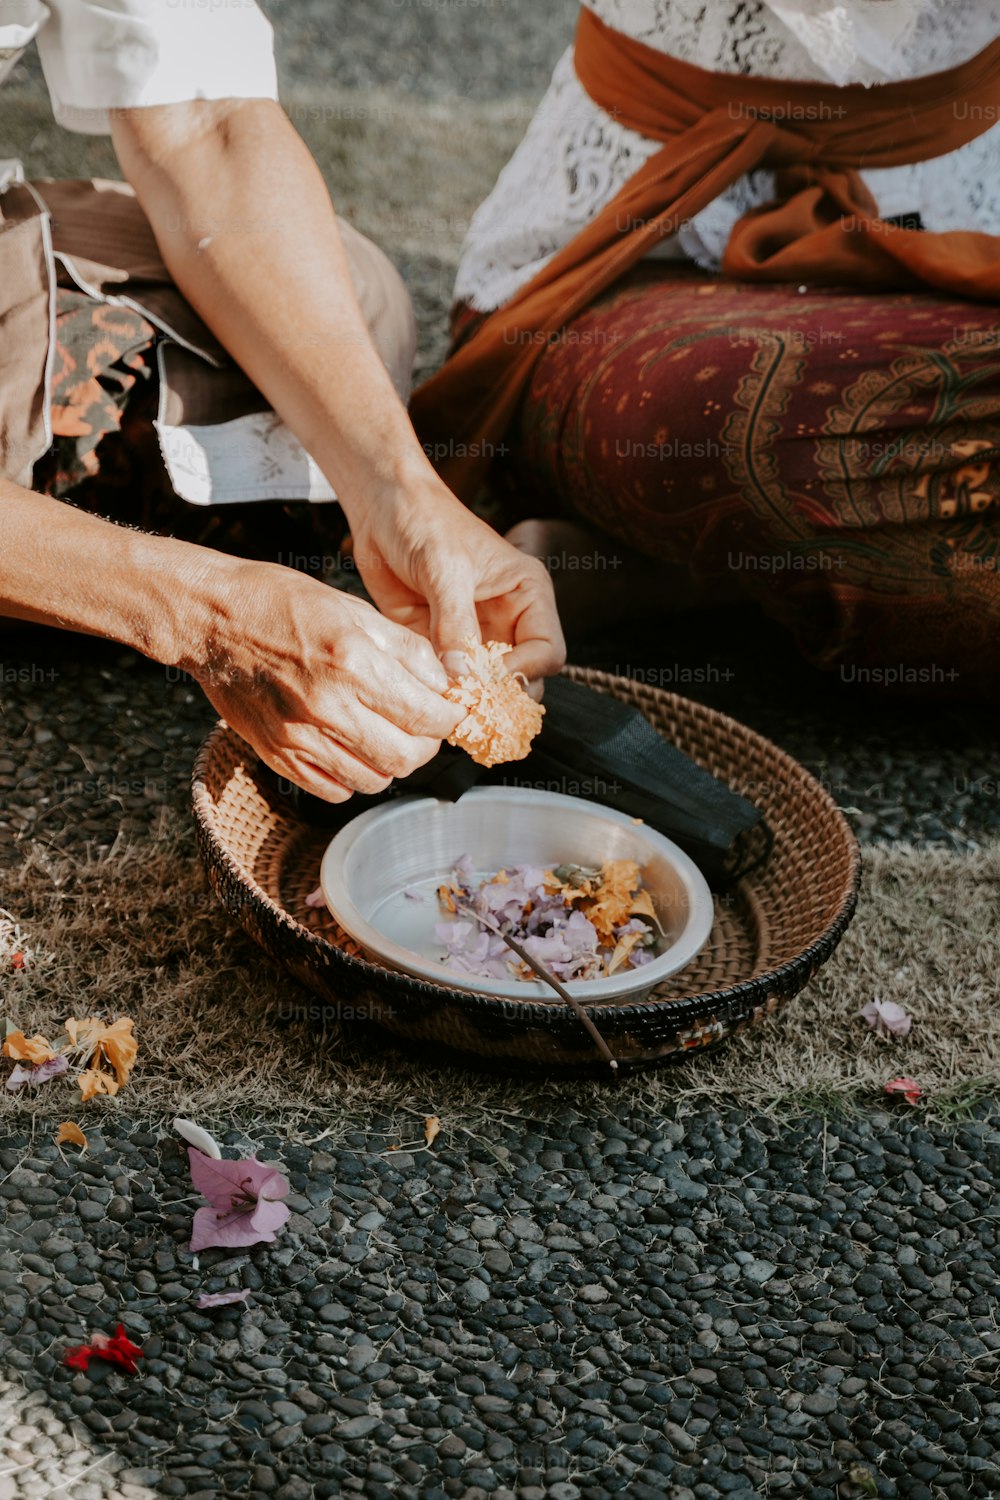 a person sitting on the ground peeling food off of a plate